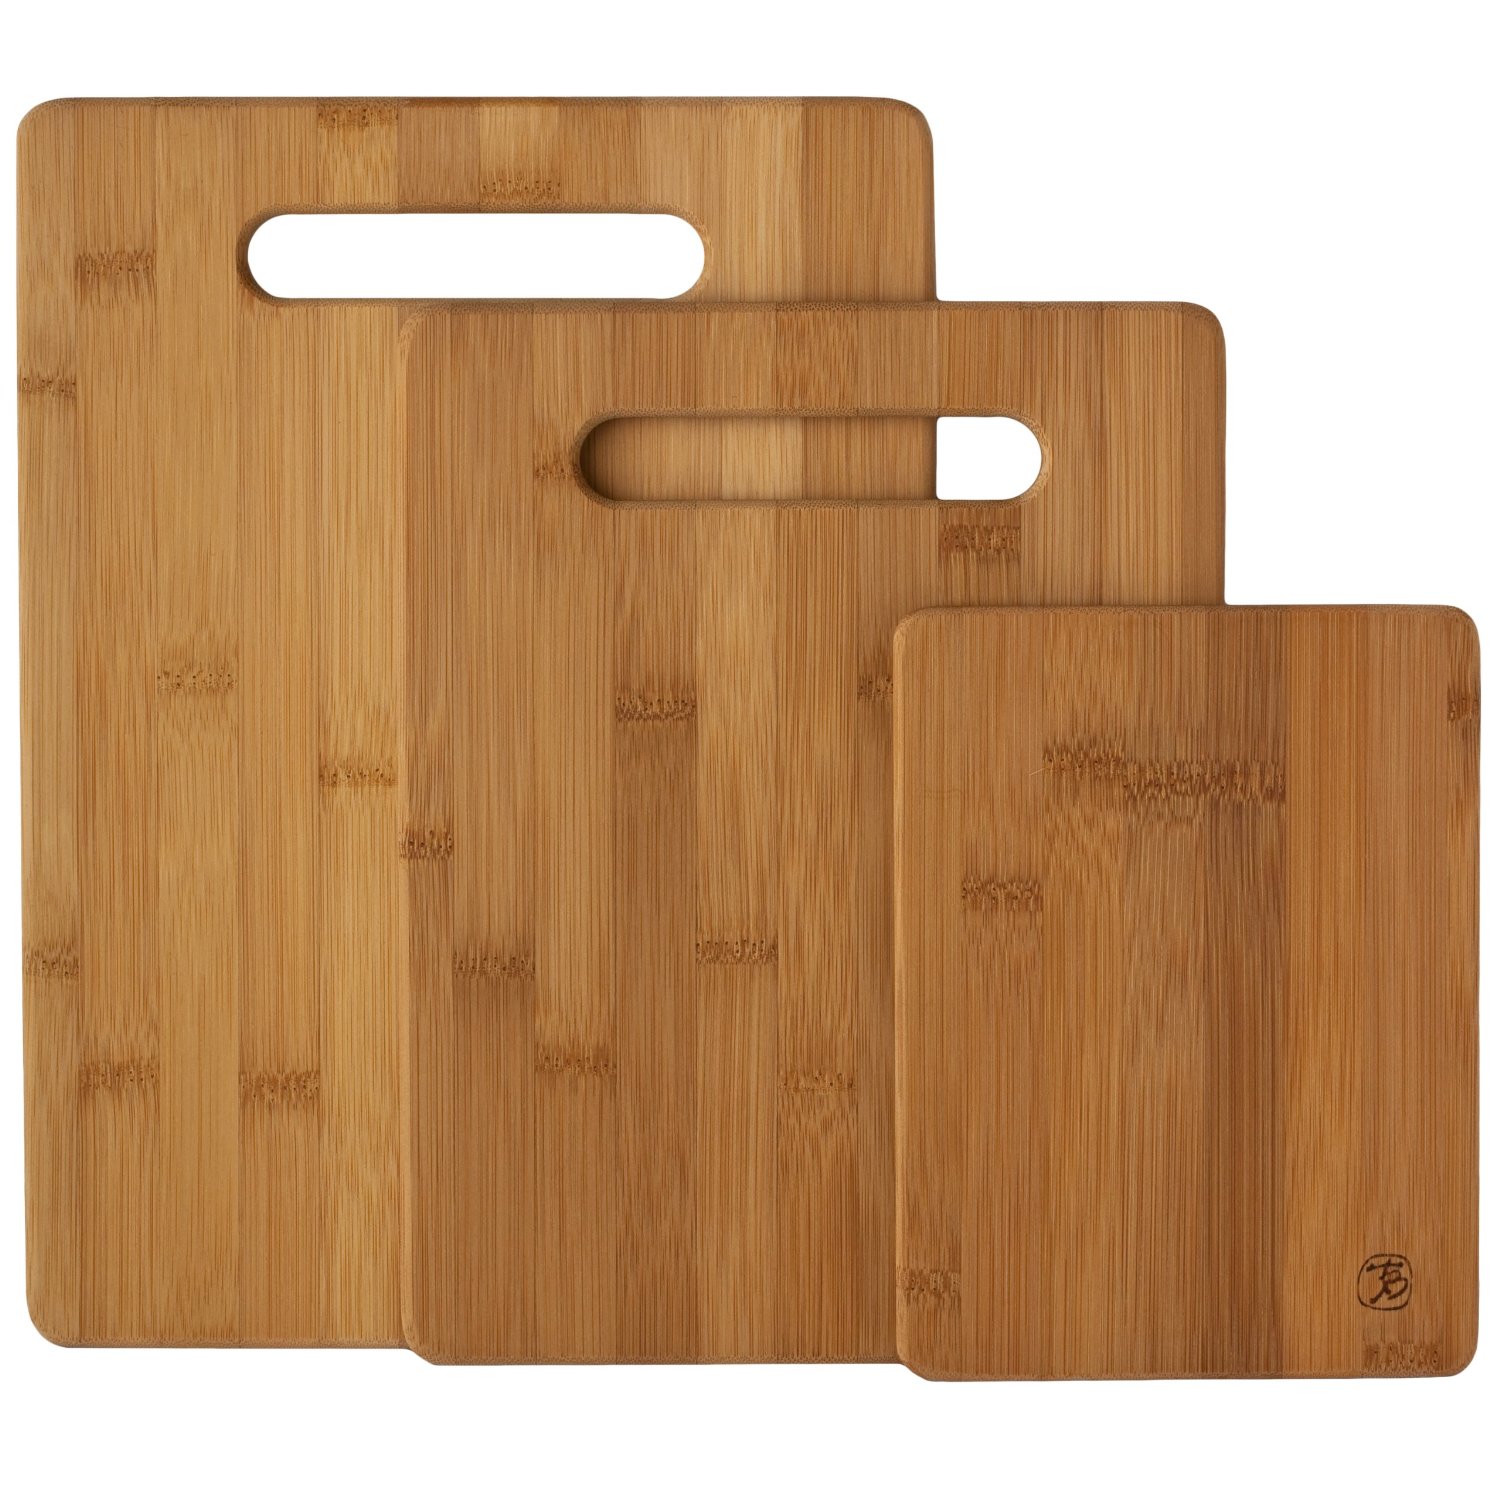 Set of 3 Totally Bamboo Cutting Boards ONLY $13.99!! Better Than Amazon!